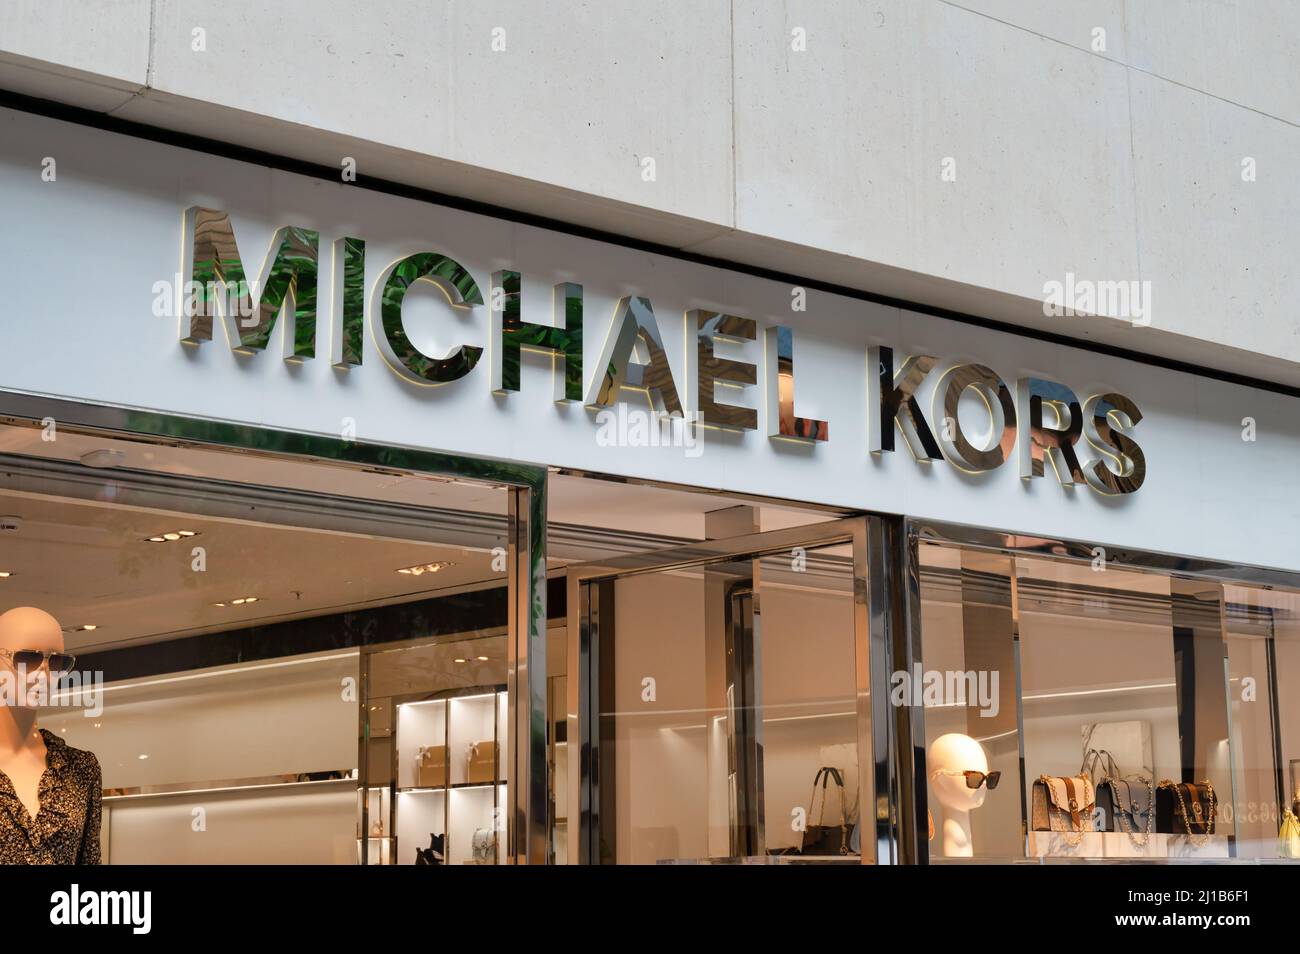 Milan, Italy - September 24, 2021: Michael Kors luxury and